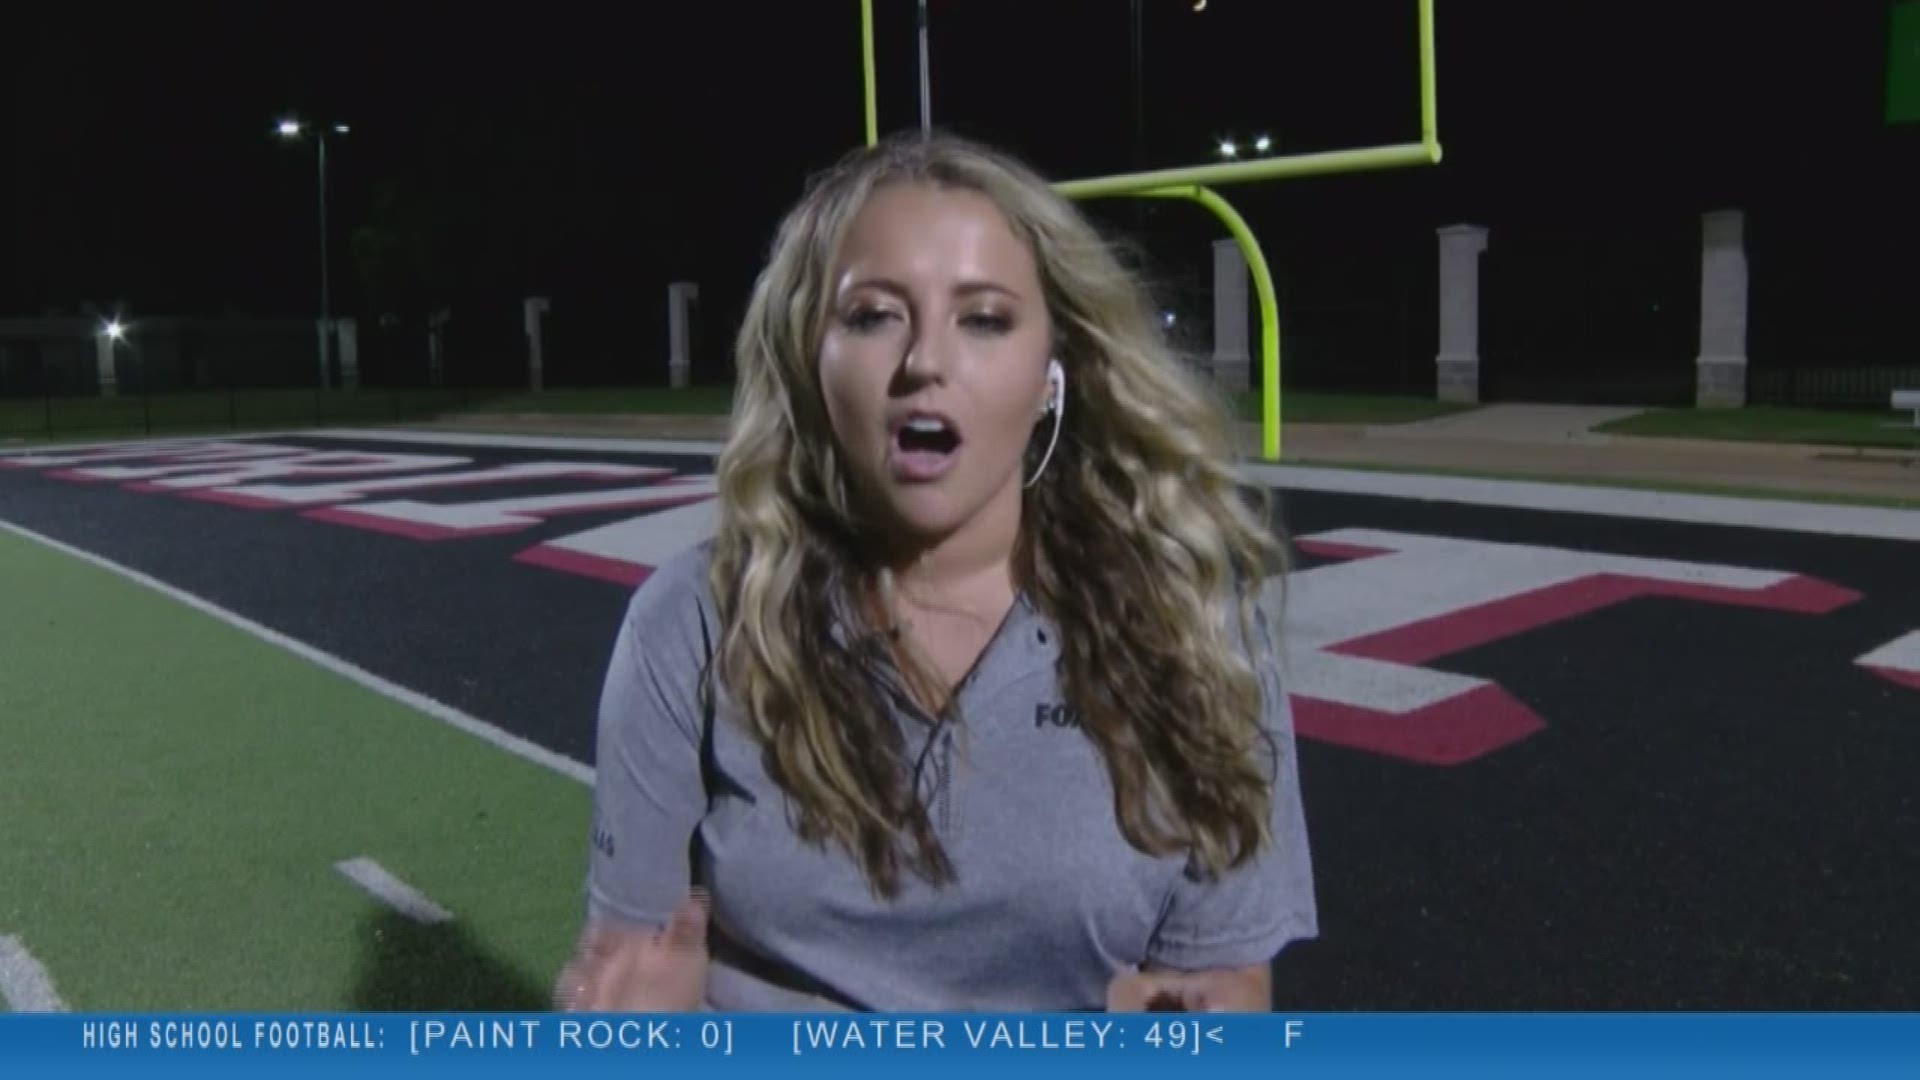 Our newest FOX West Texas Sports reporter Casey Buscher covers her first West Texas football game.